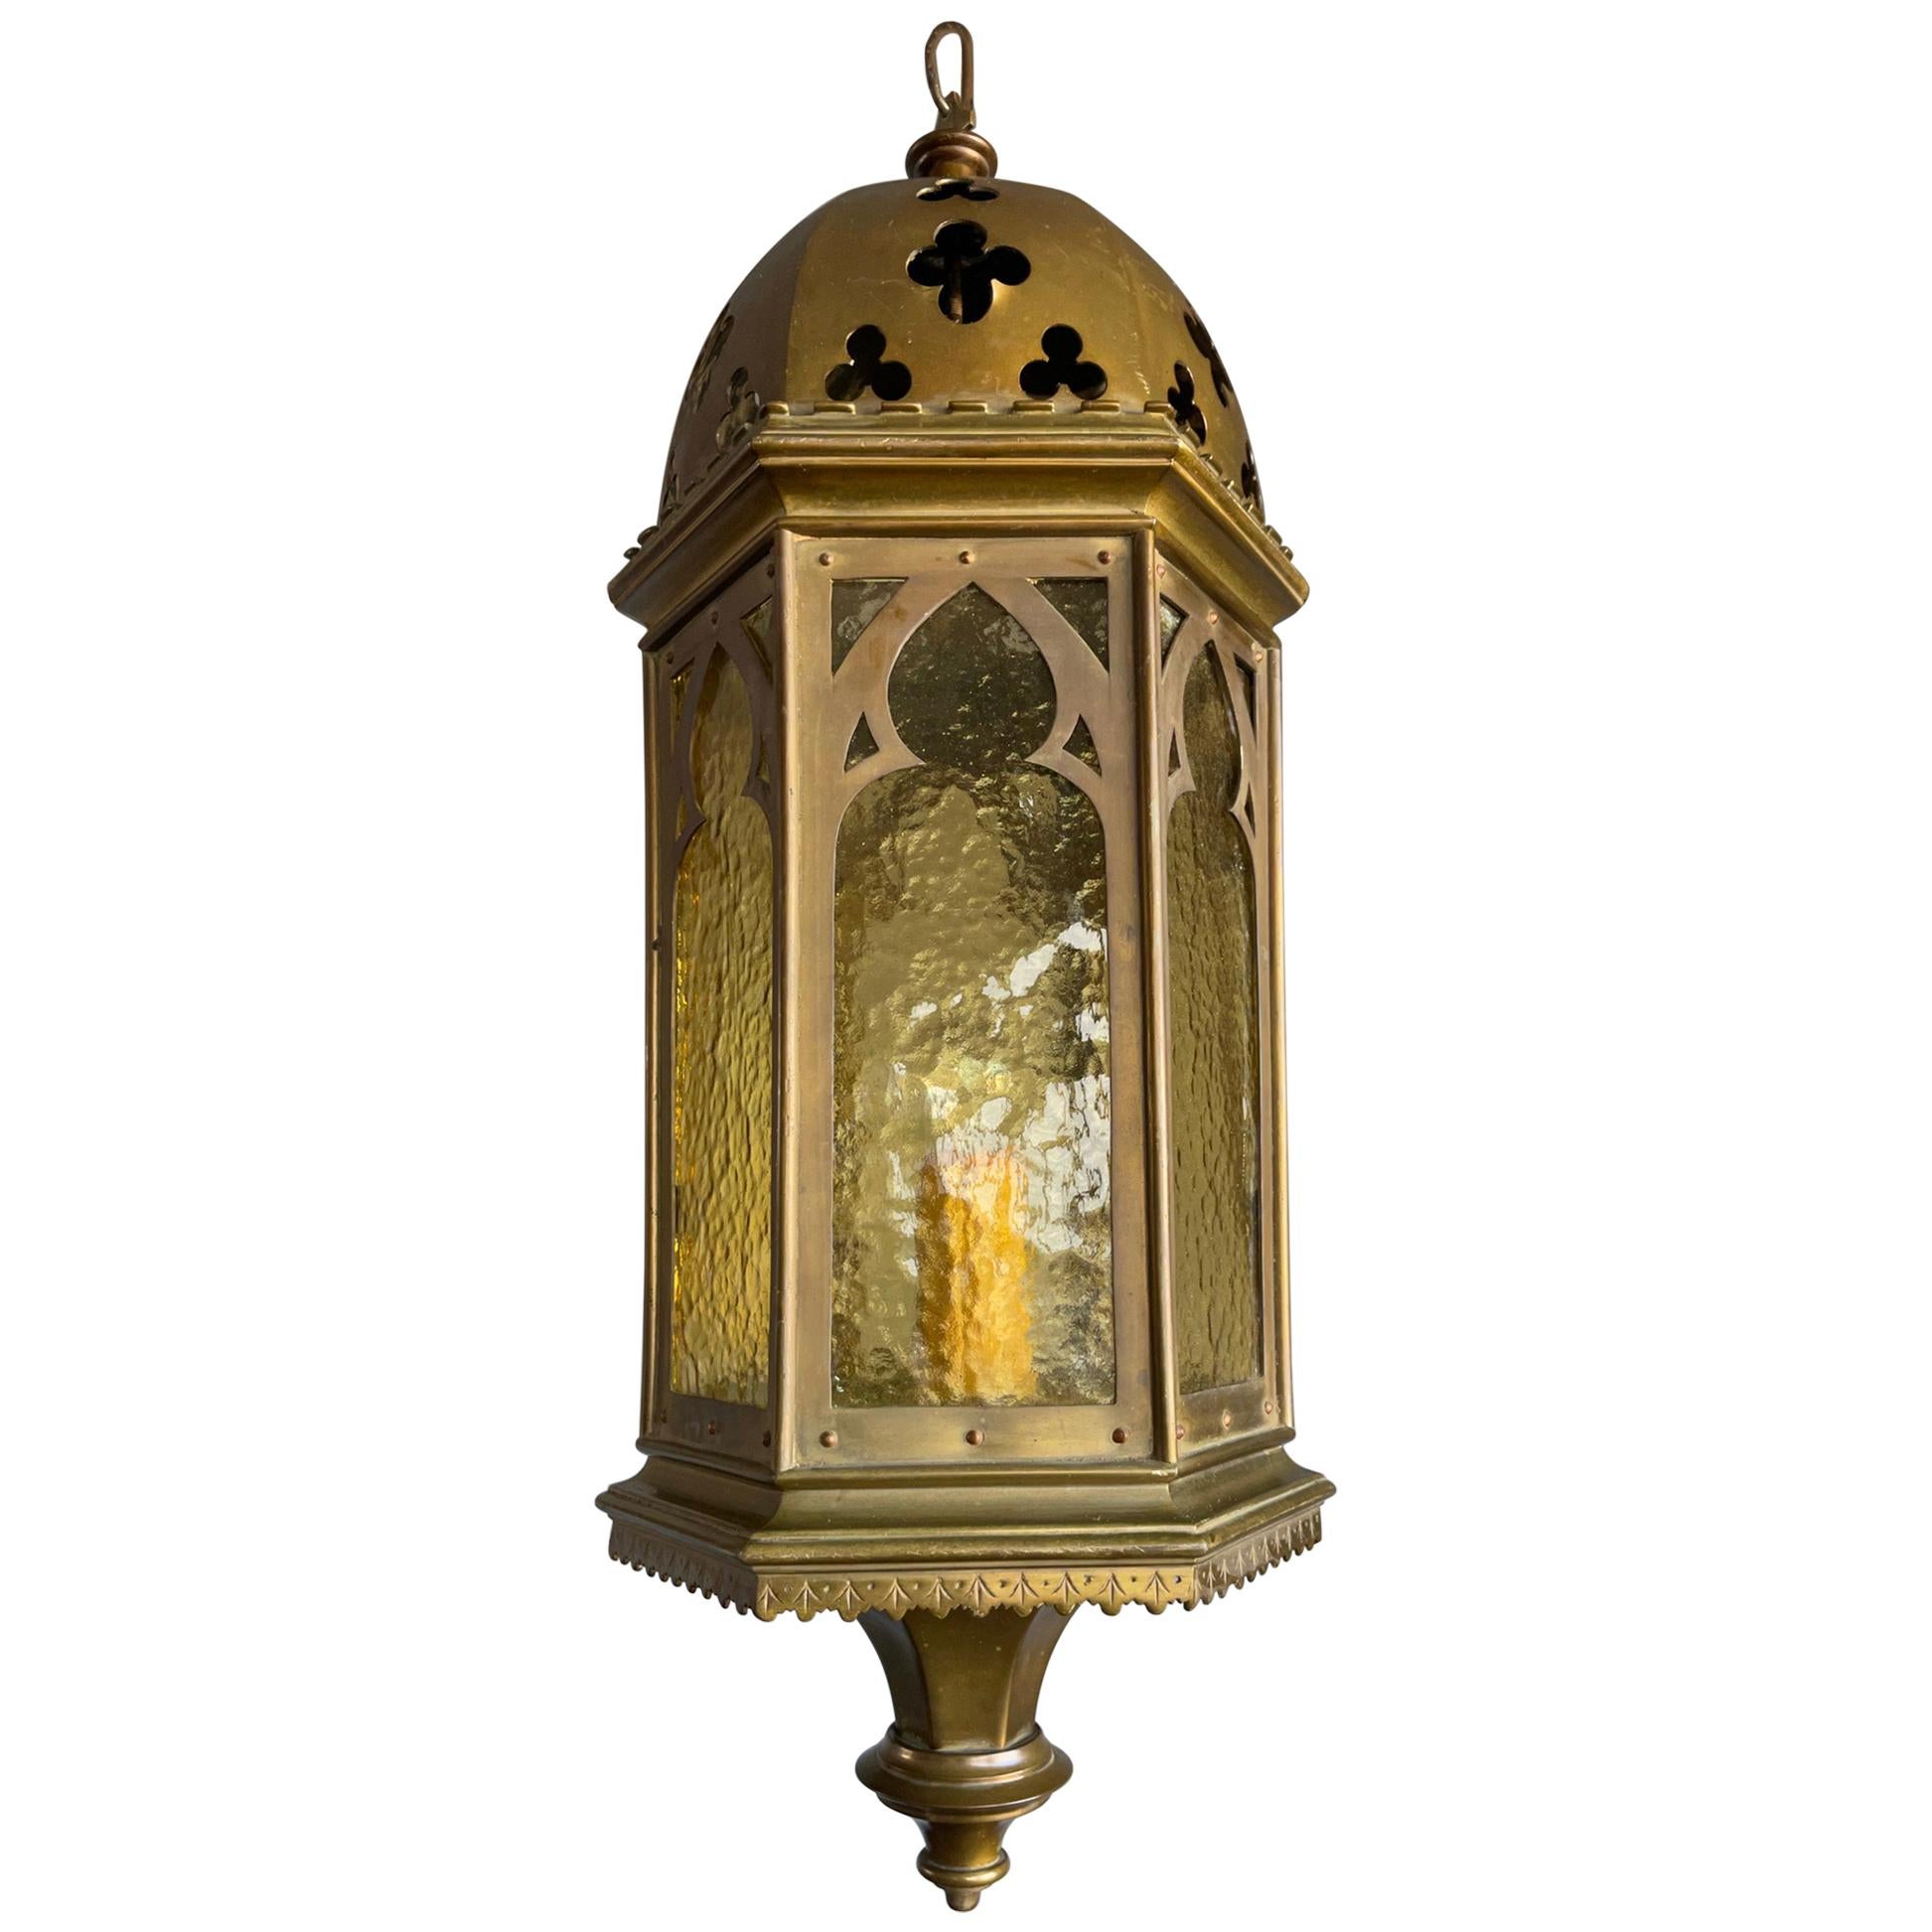 Rare Antique & Stylish Gothic Revival Brass Lantern with Cathedral Glass Windows